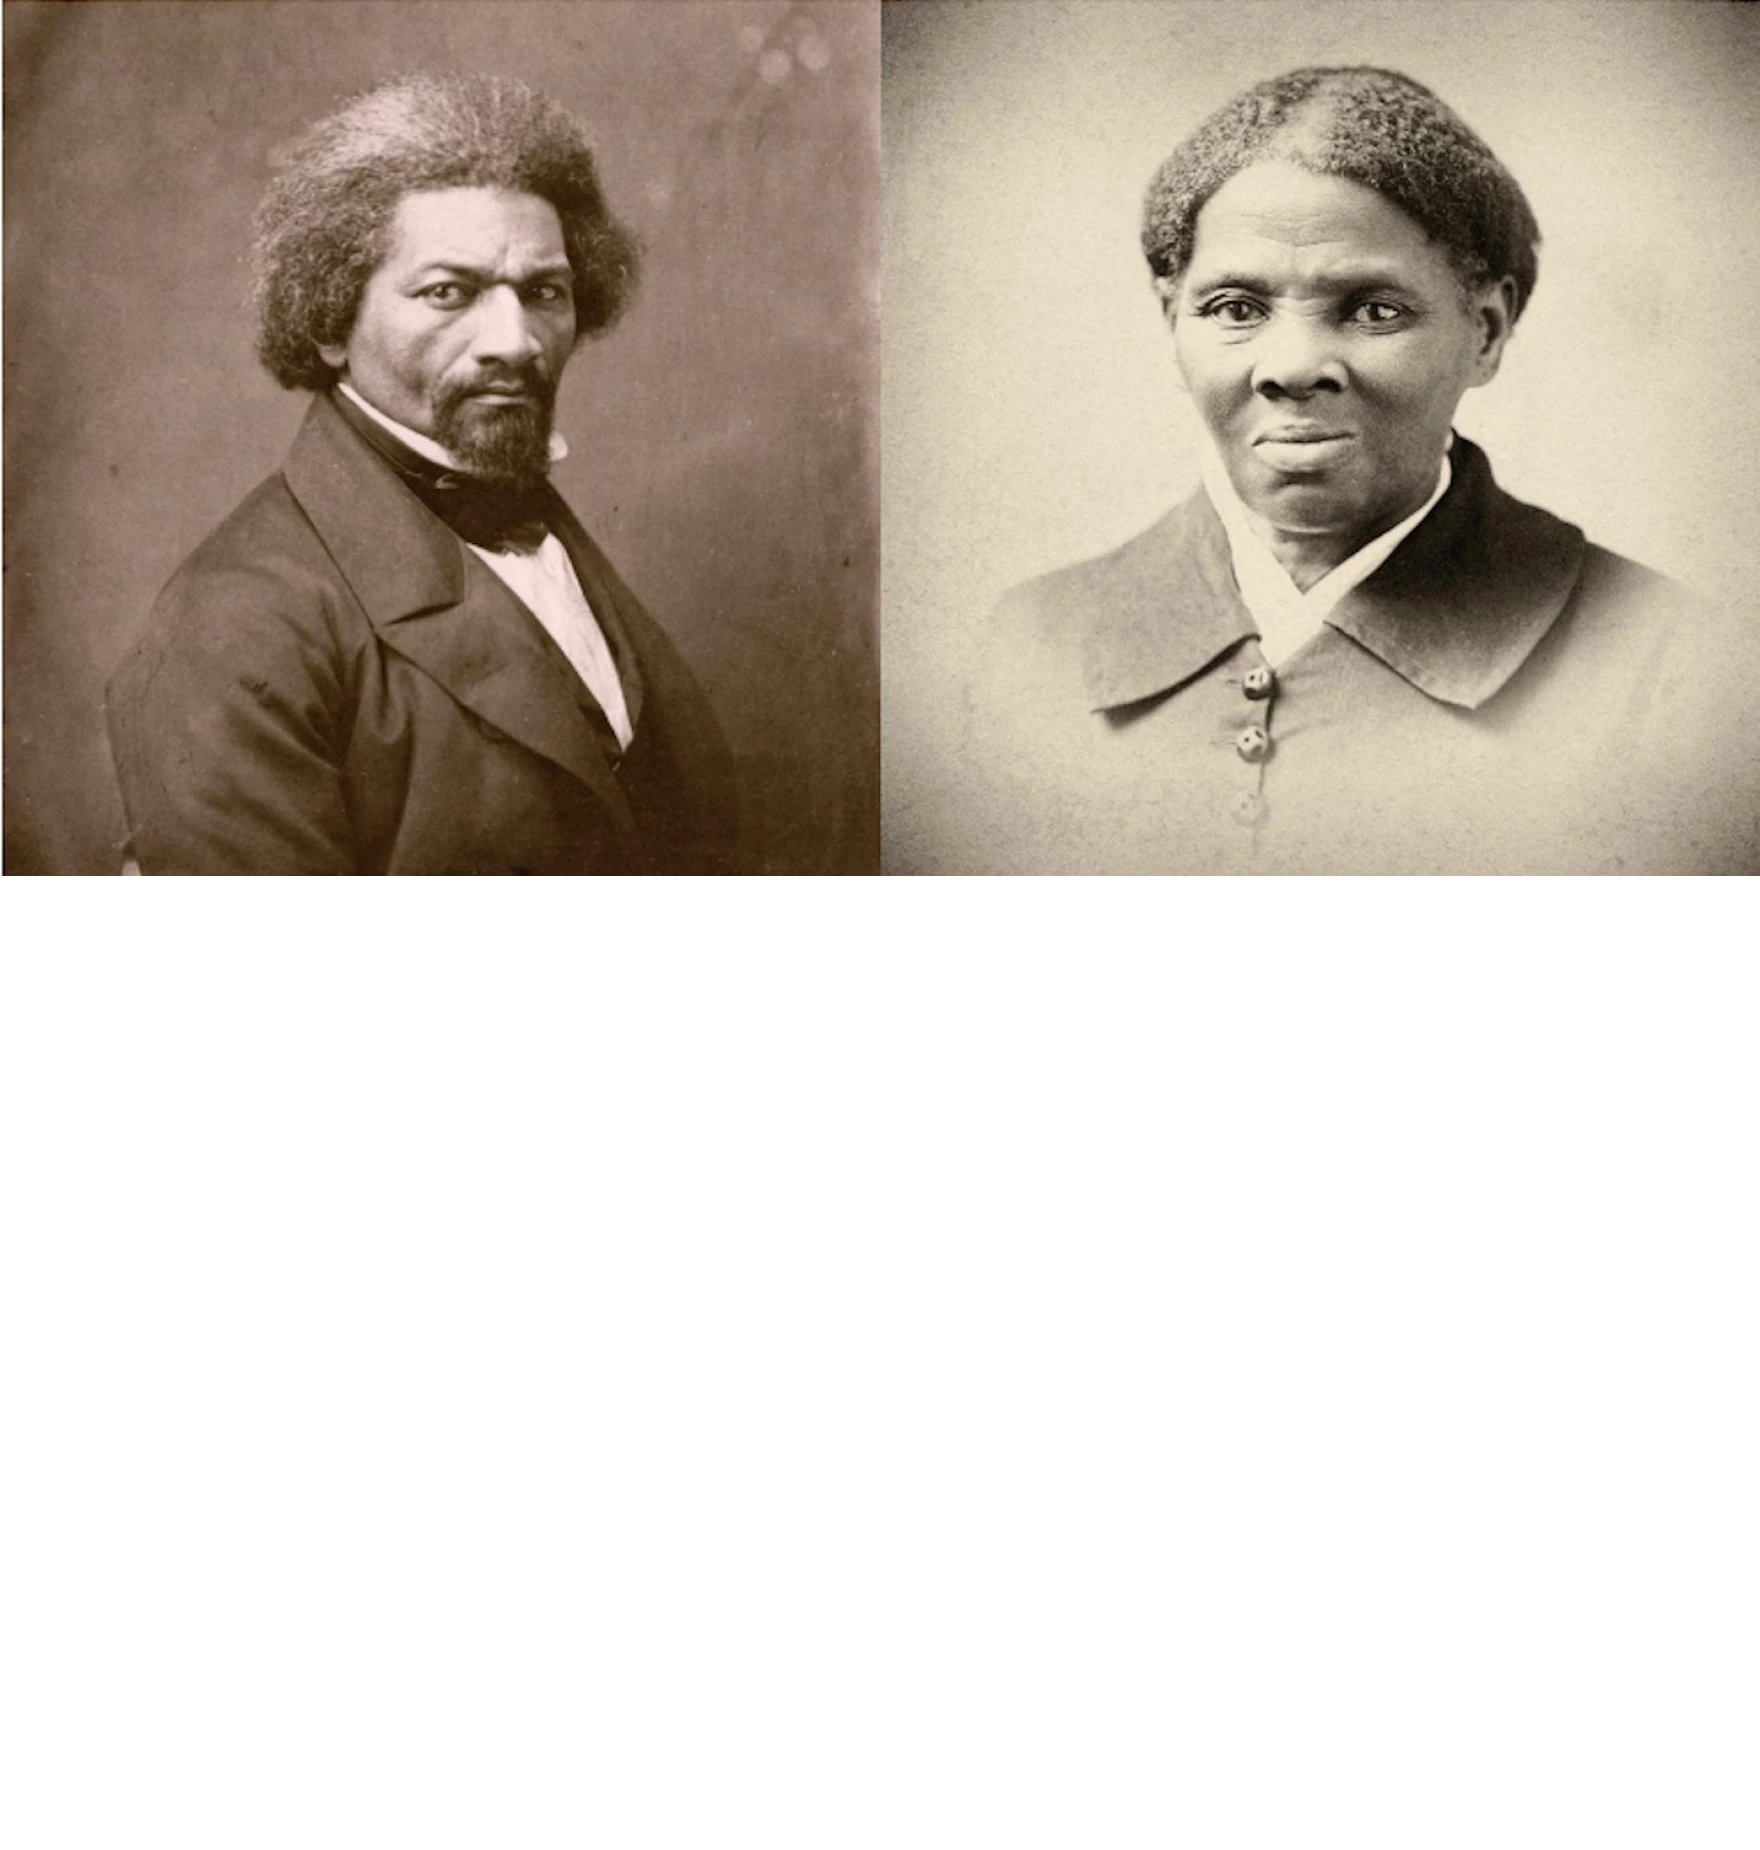 Icons of freedom: Harriet Tubman and Frederick Douglass